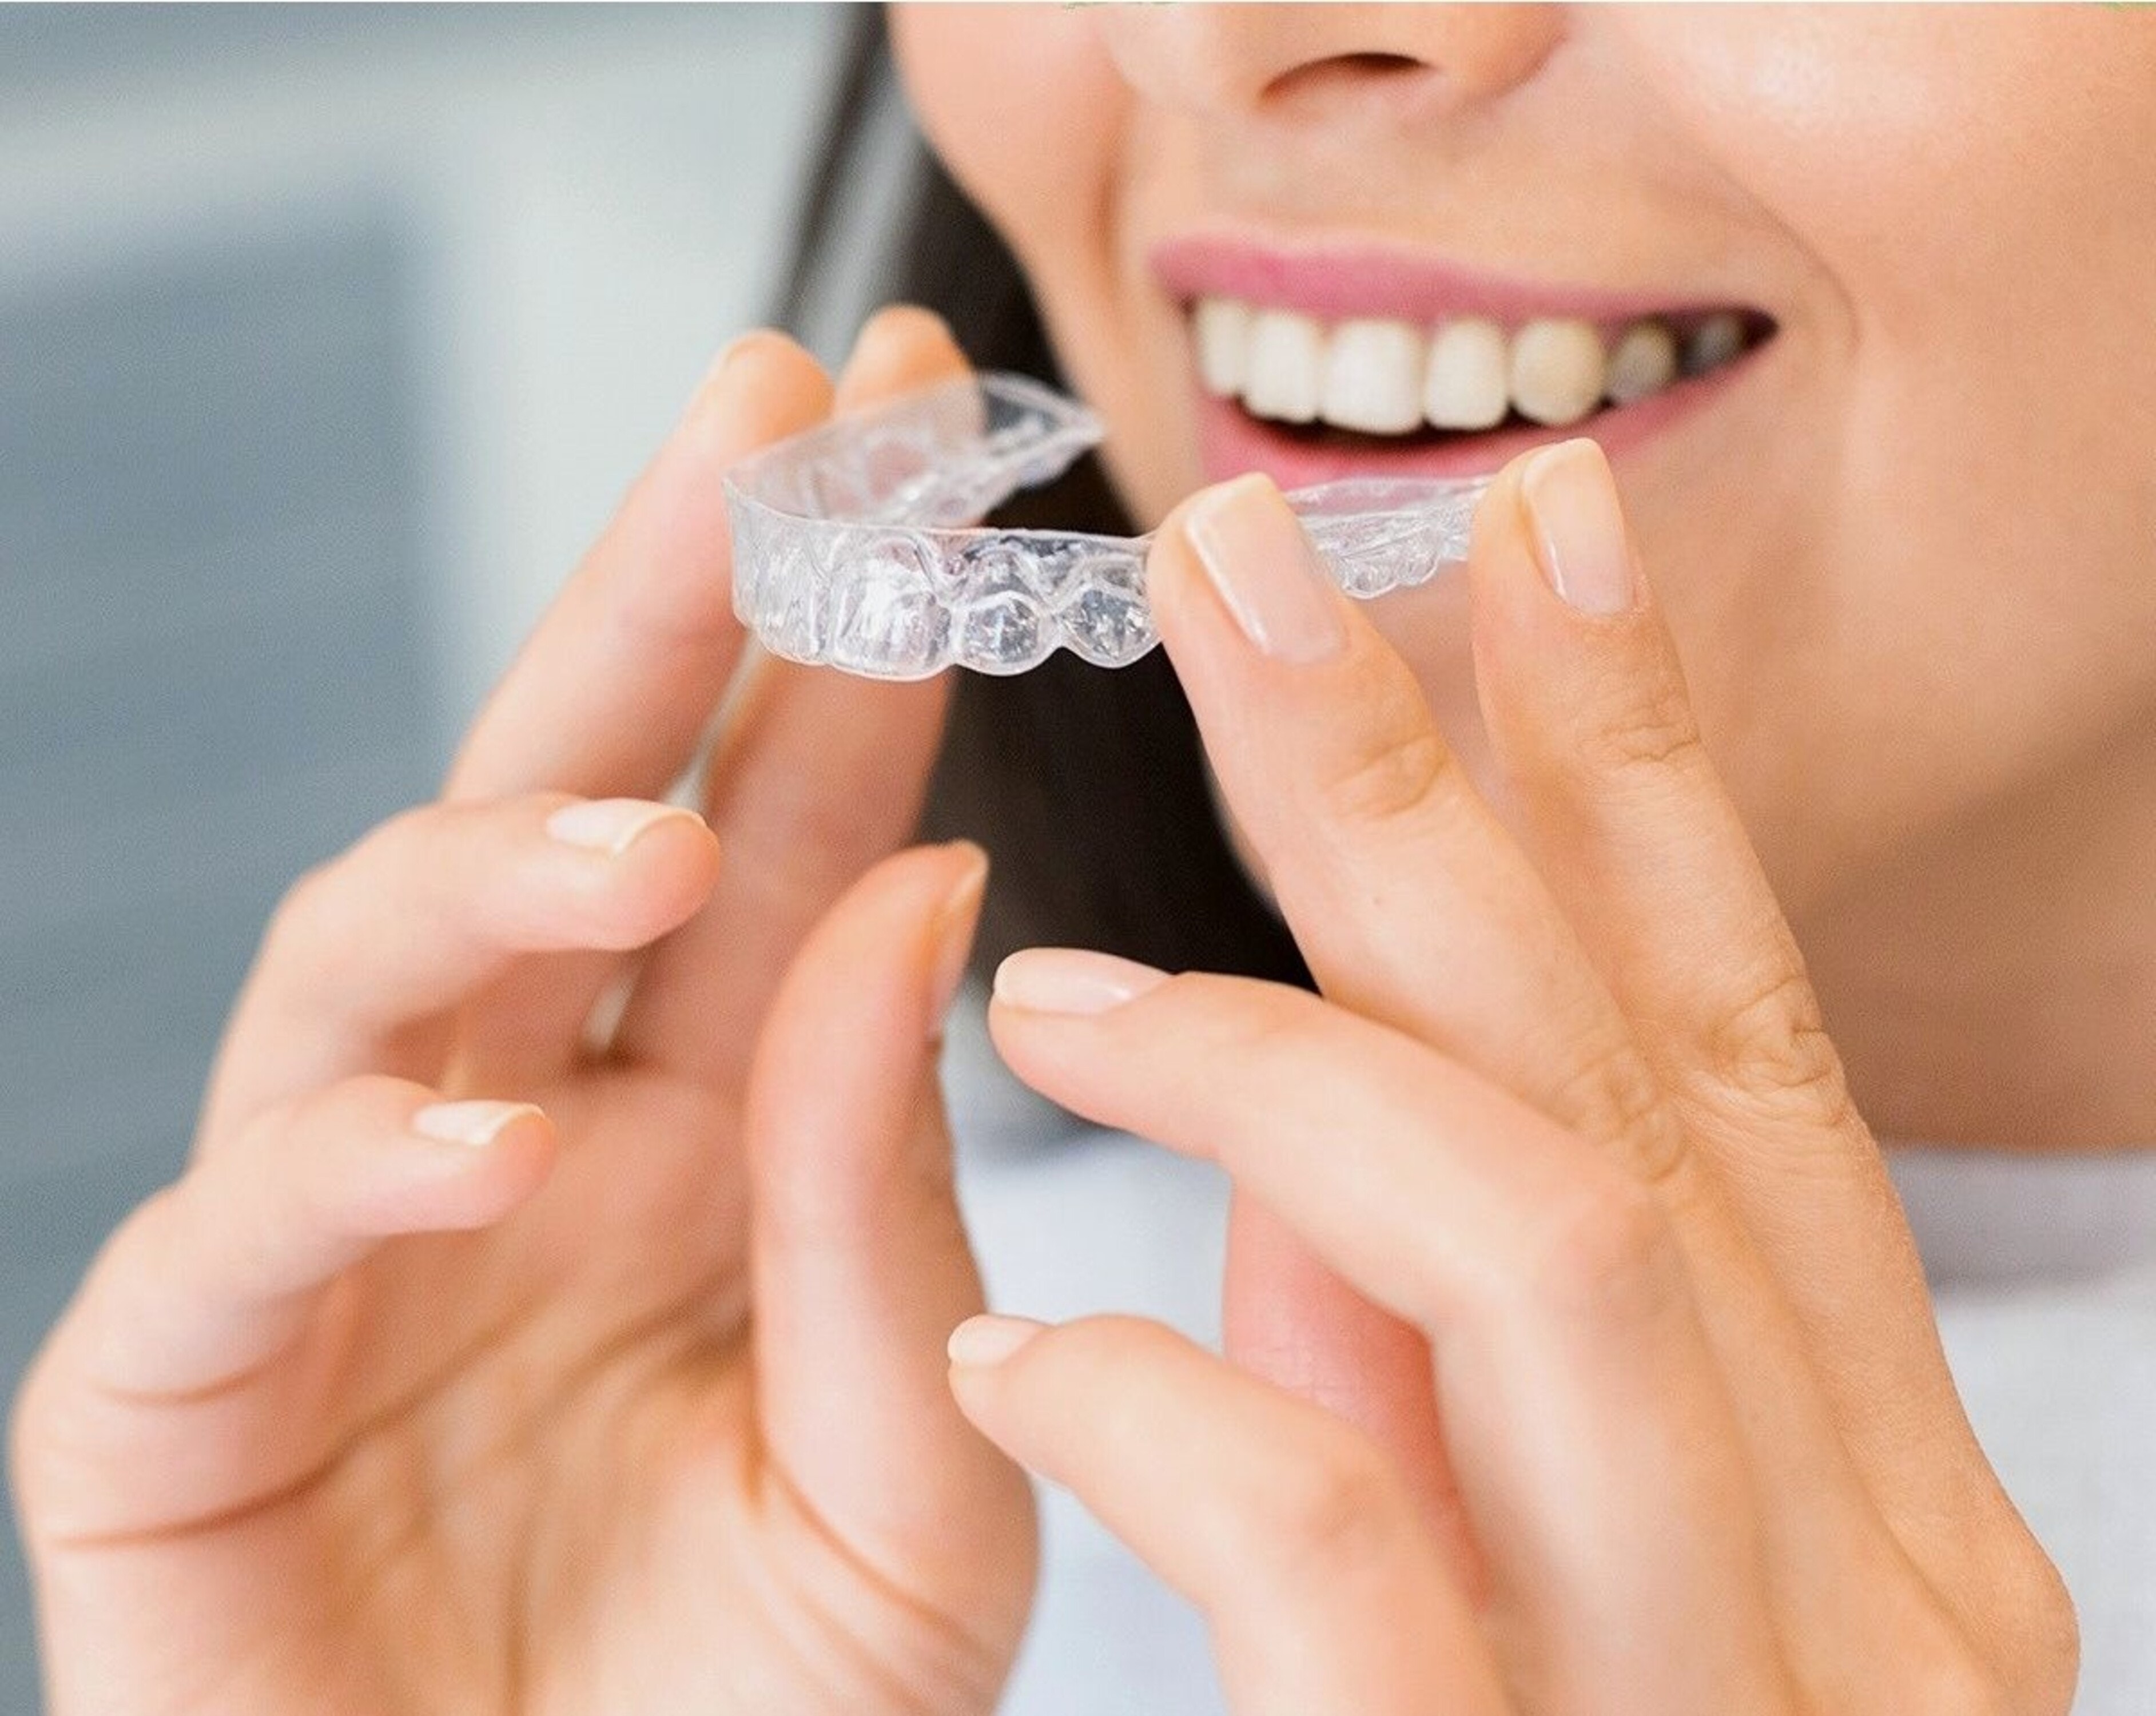 How to Care for Invisalign® Aligners & Proper Use